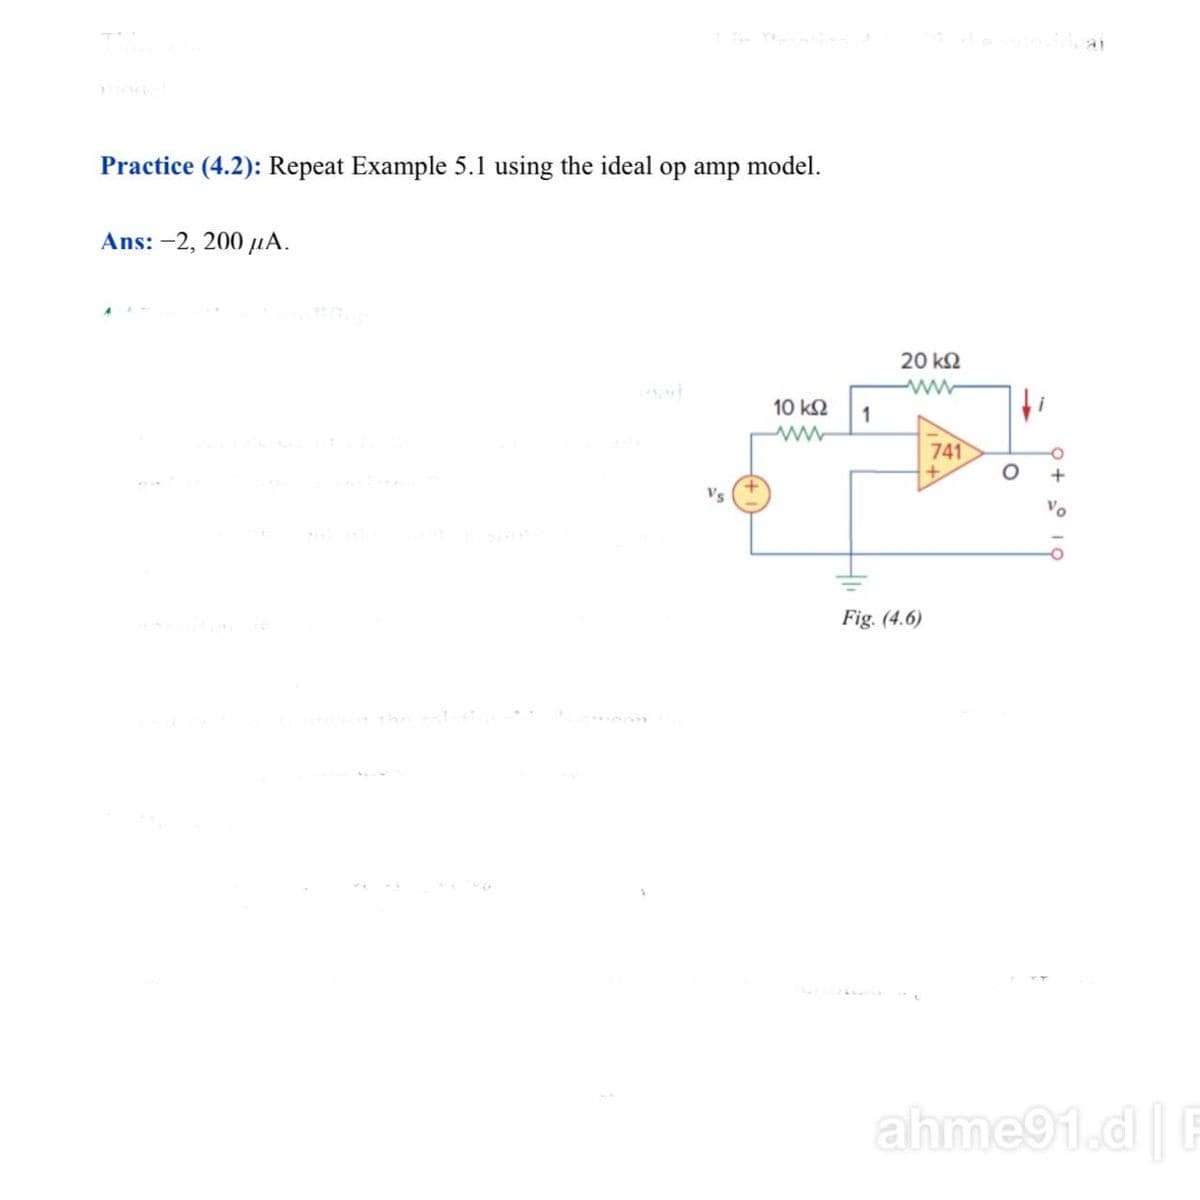 Practice (4.2): Repeat Example 5.1 using the ideal op amp model.
Ans: -2, 200 uA.
20 k2
10 k2
1
741
Vs
Fig. (4.6)
ahme91.d |E
